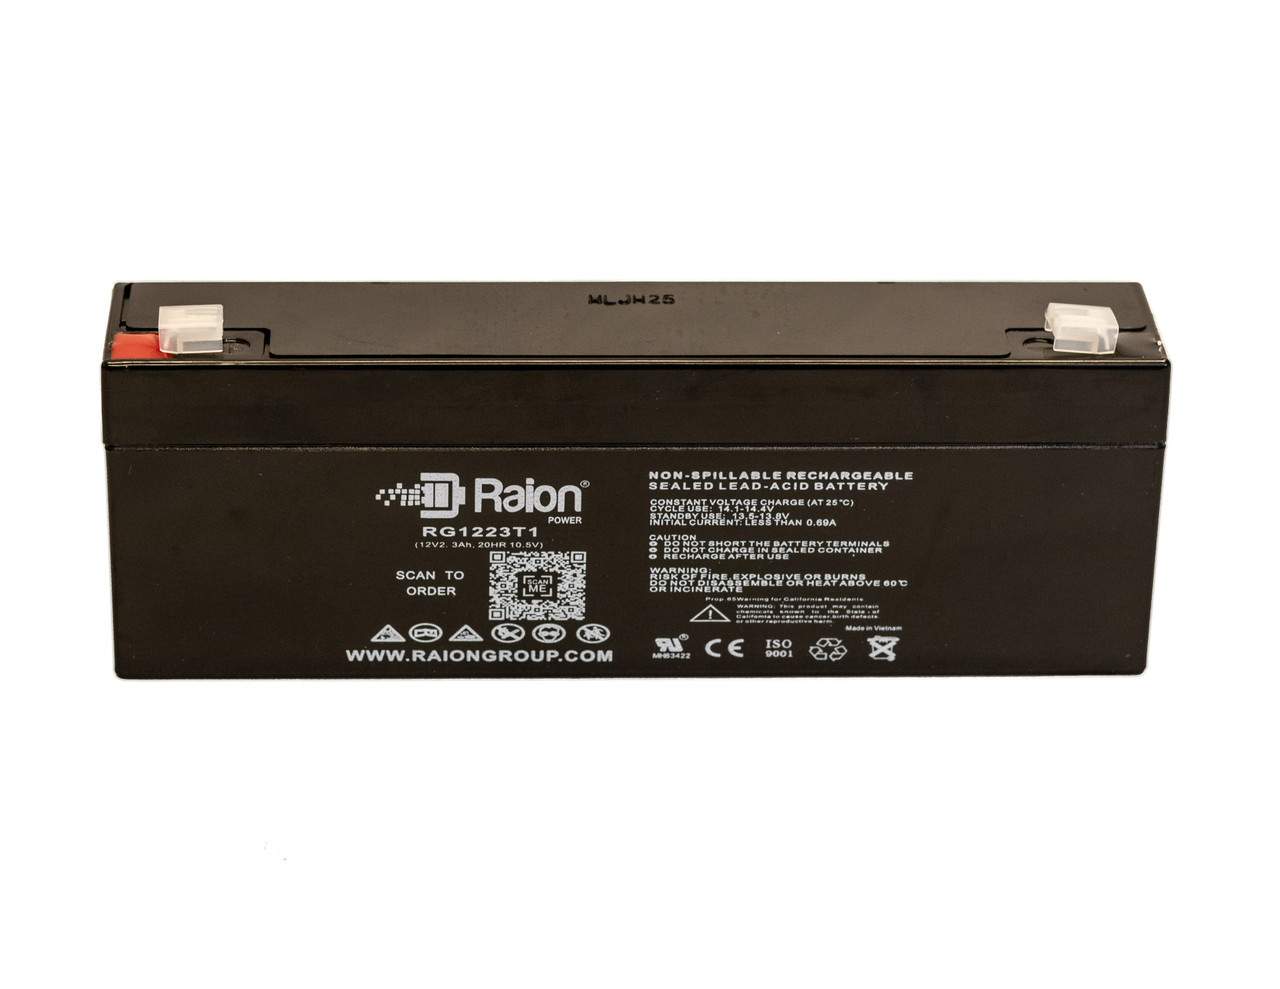 Raion Power 12V 2.3Ah SLA Battery With T1 Terminals For Brentwood Instruments LS5 ECG Monitor